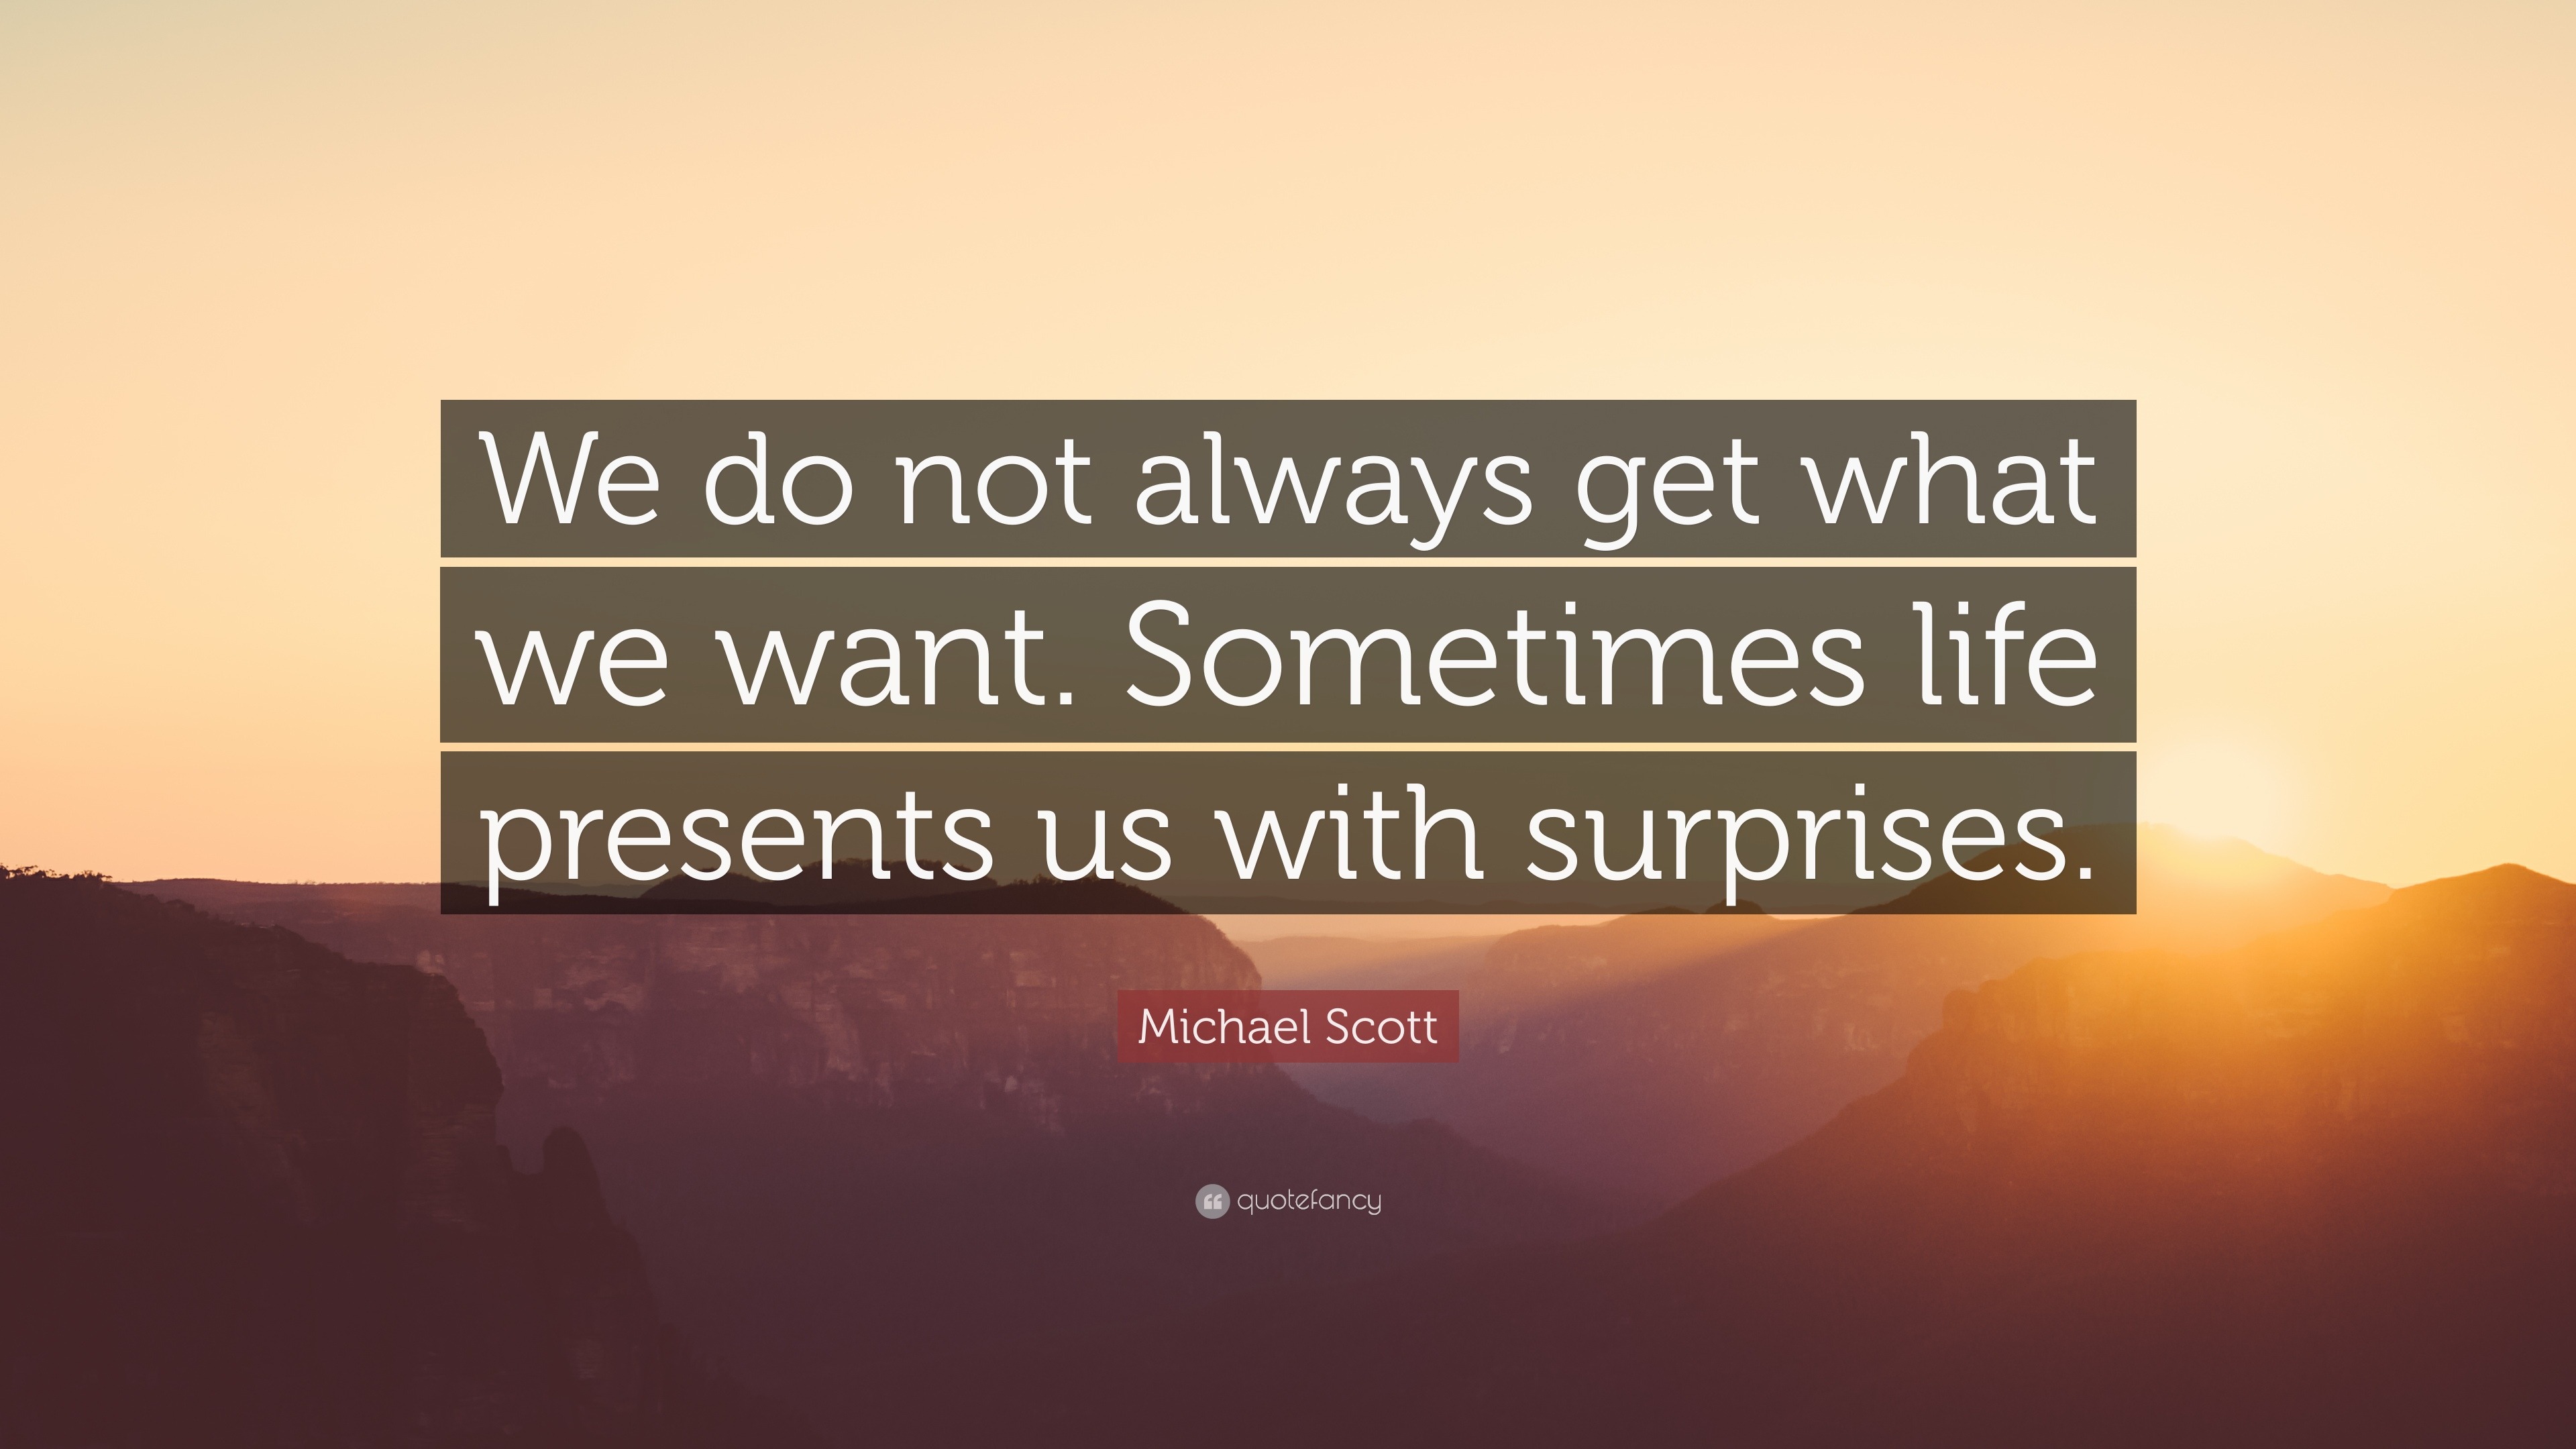 Michael Scott Quote “We do not always what we want Sometimes life